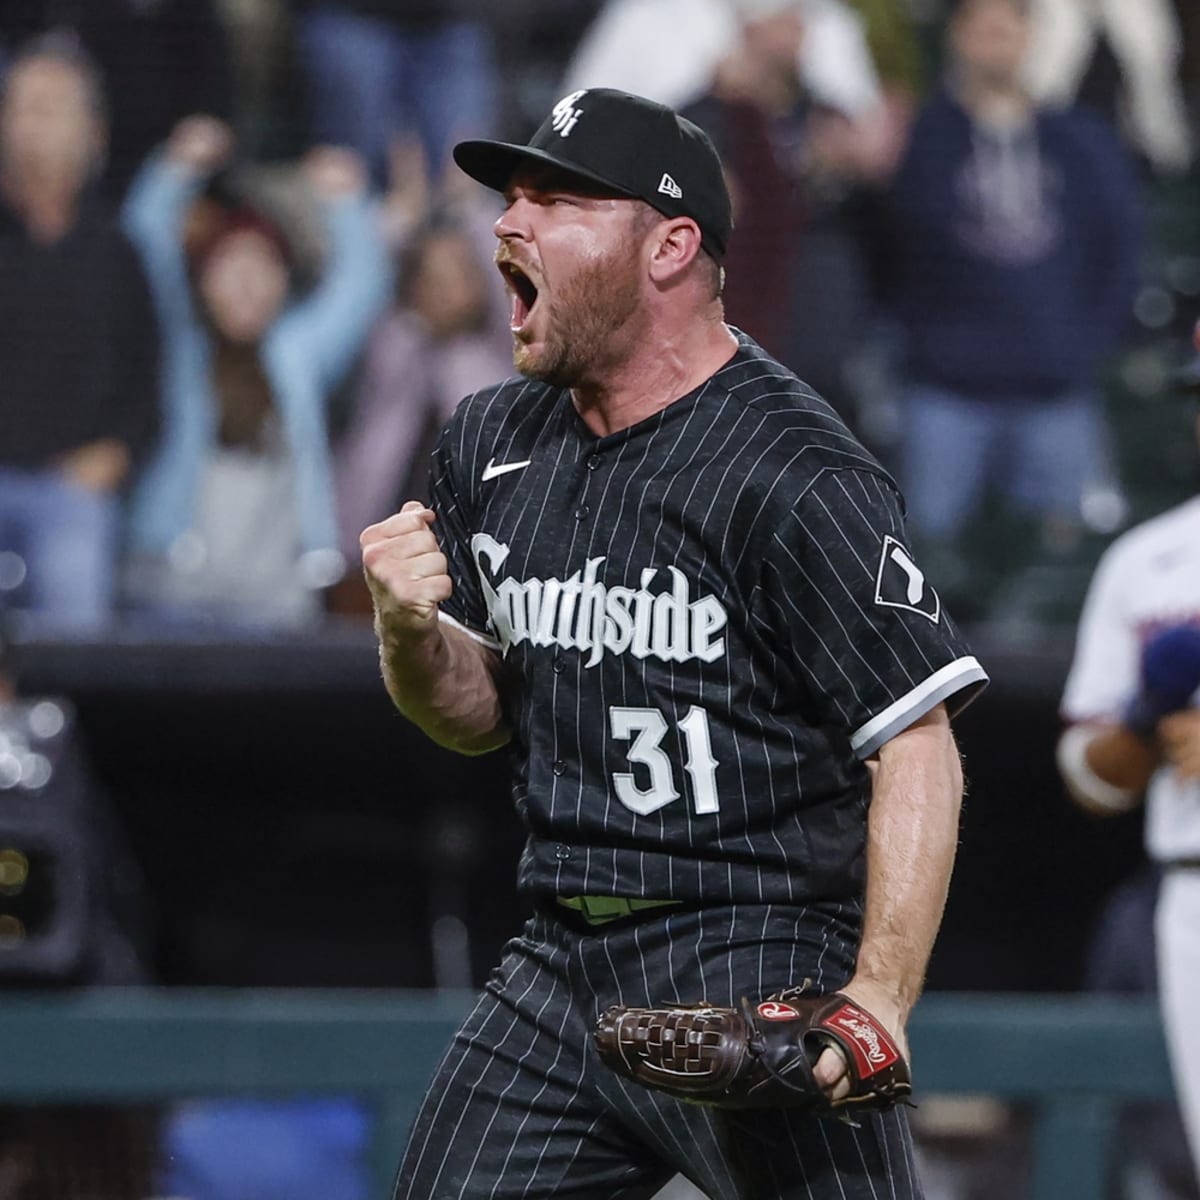 Chicago White Sox' Liam Hendriks Announces He is Cancer-Free! - Fastball